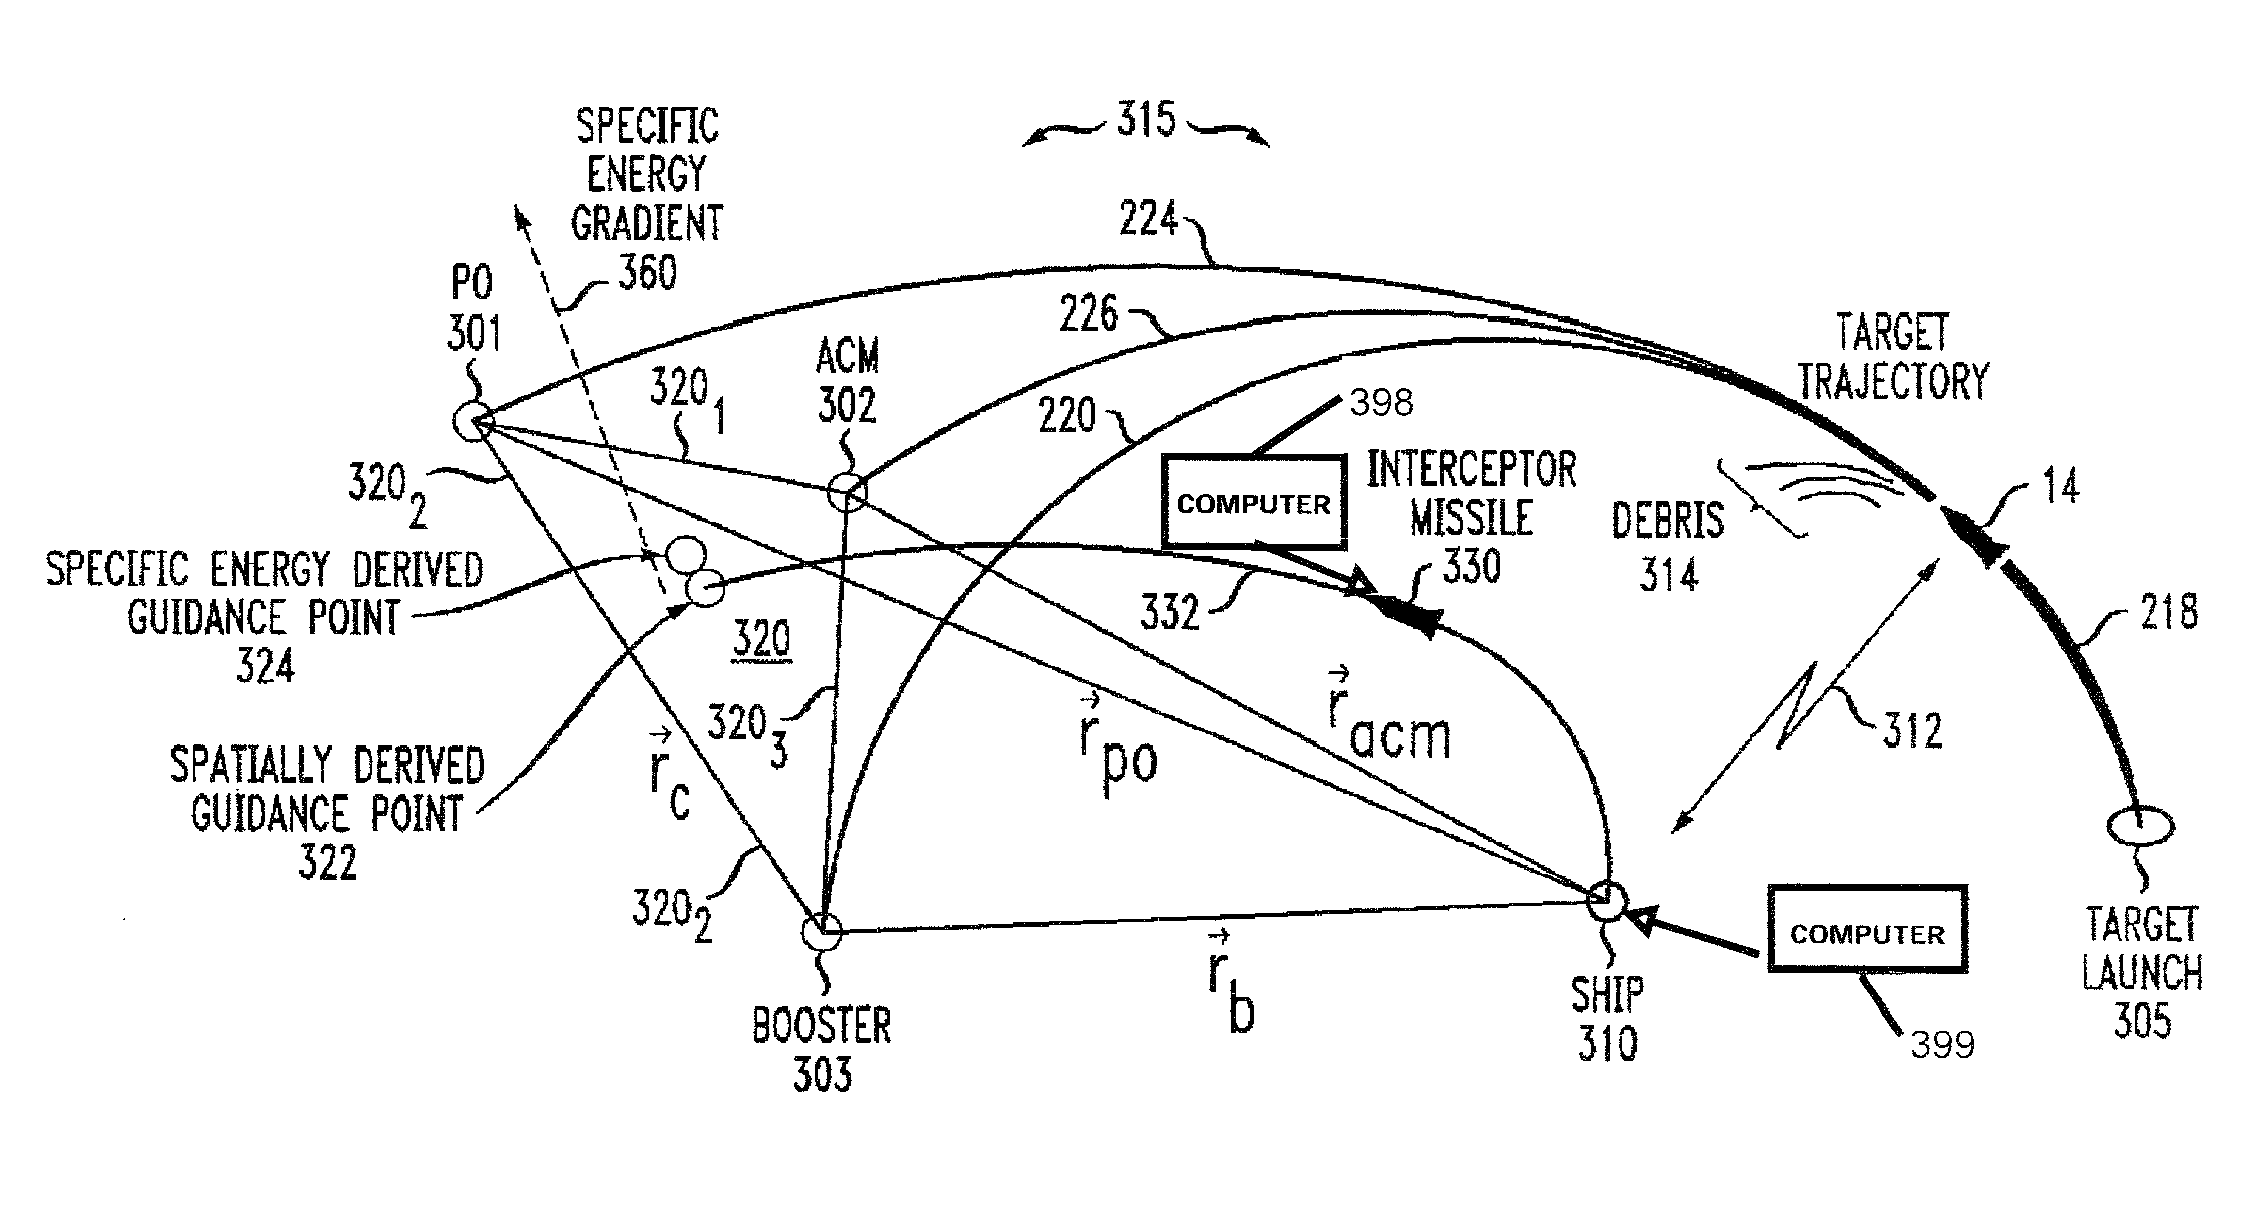 Method for targeting a preferred object within a group of decoys